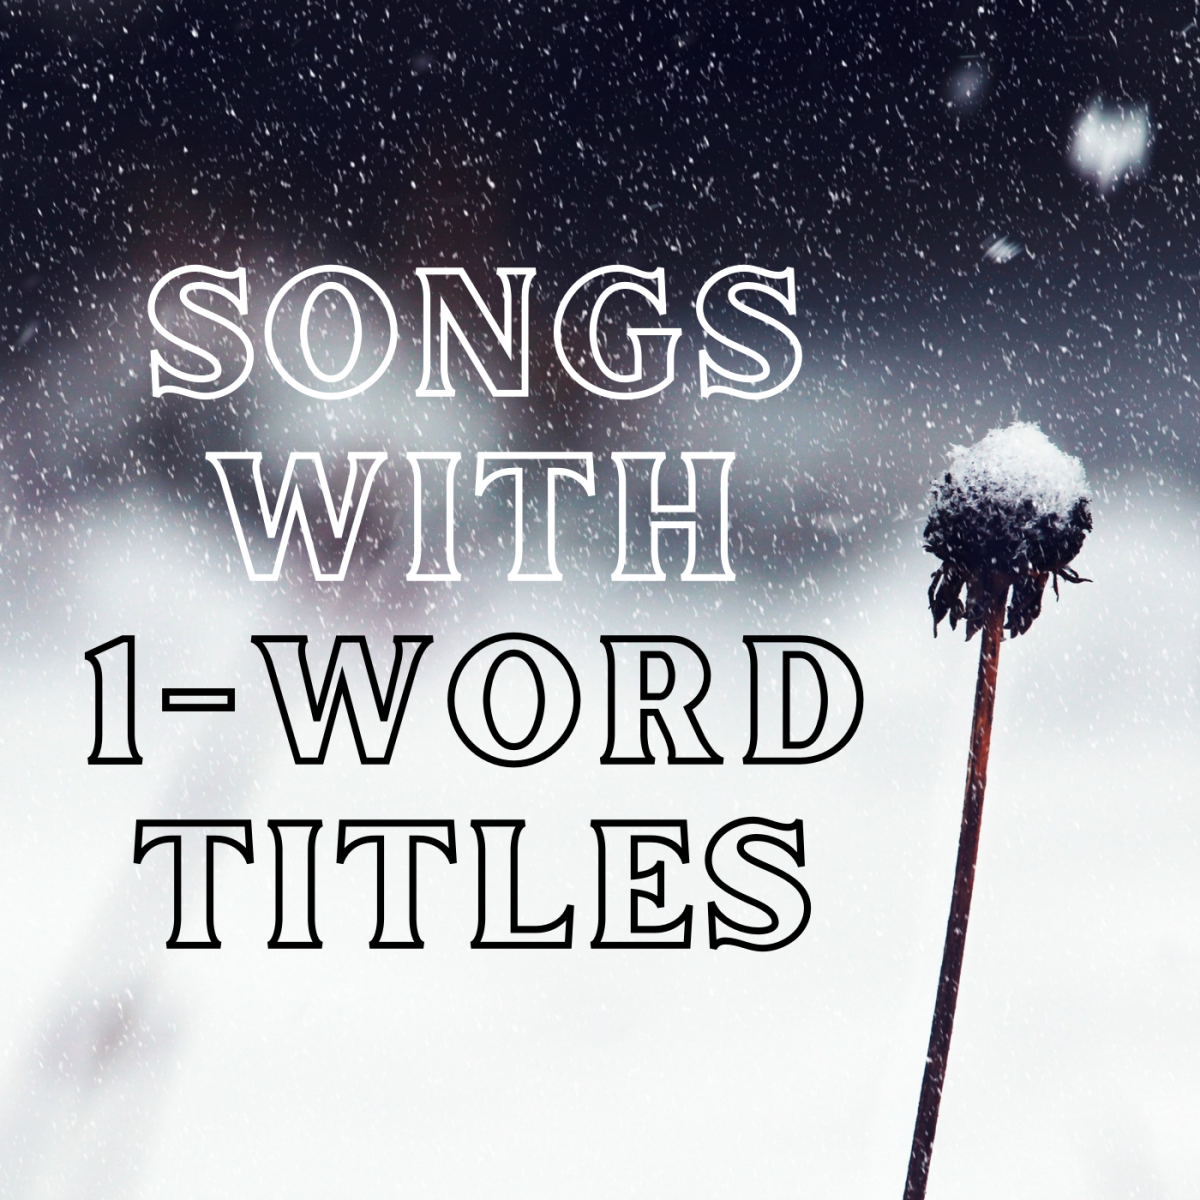 100 Best Songs With One-Word Titles